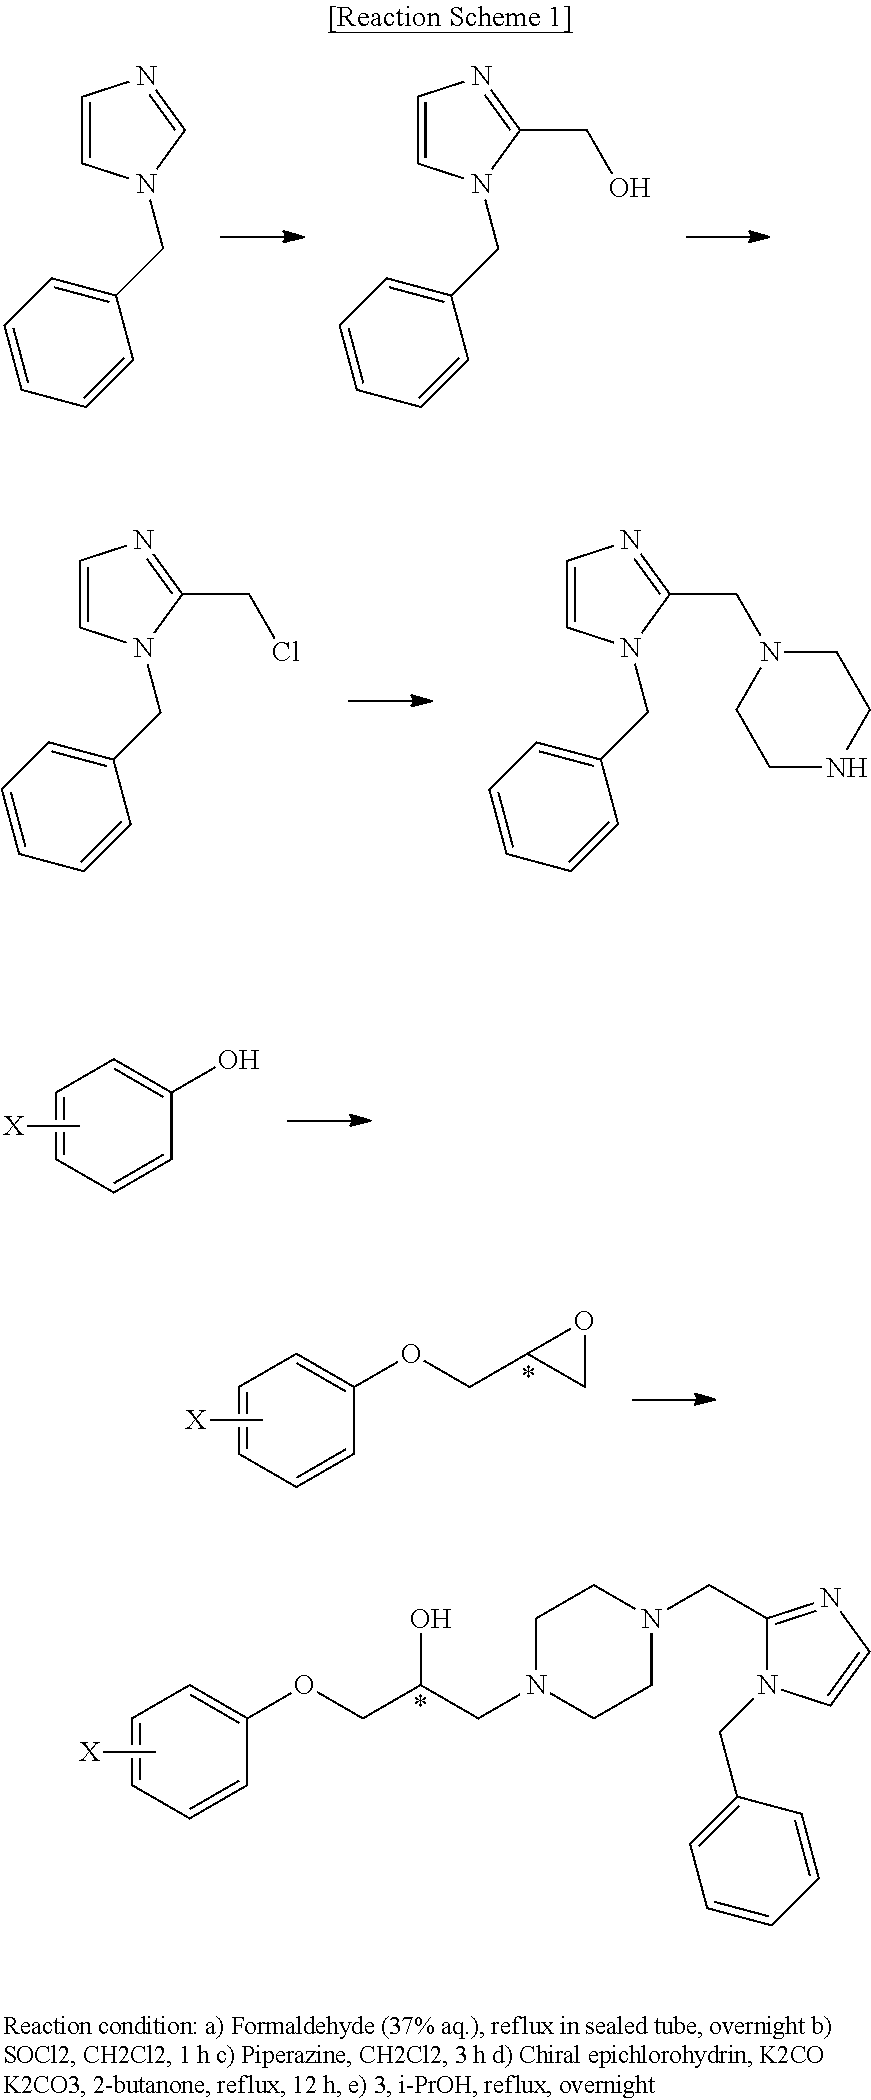 Derivatives of 1-phenoxy propan-2-ol and pharmaceutical composition containing the same